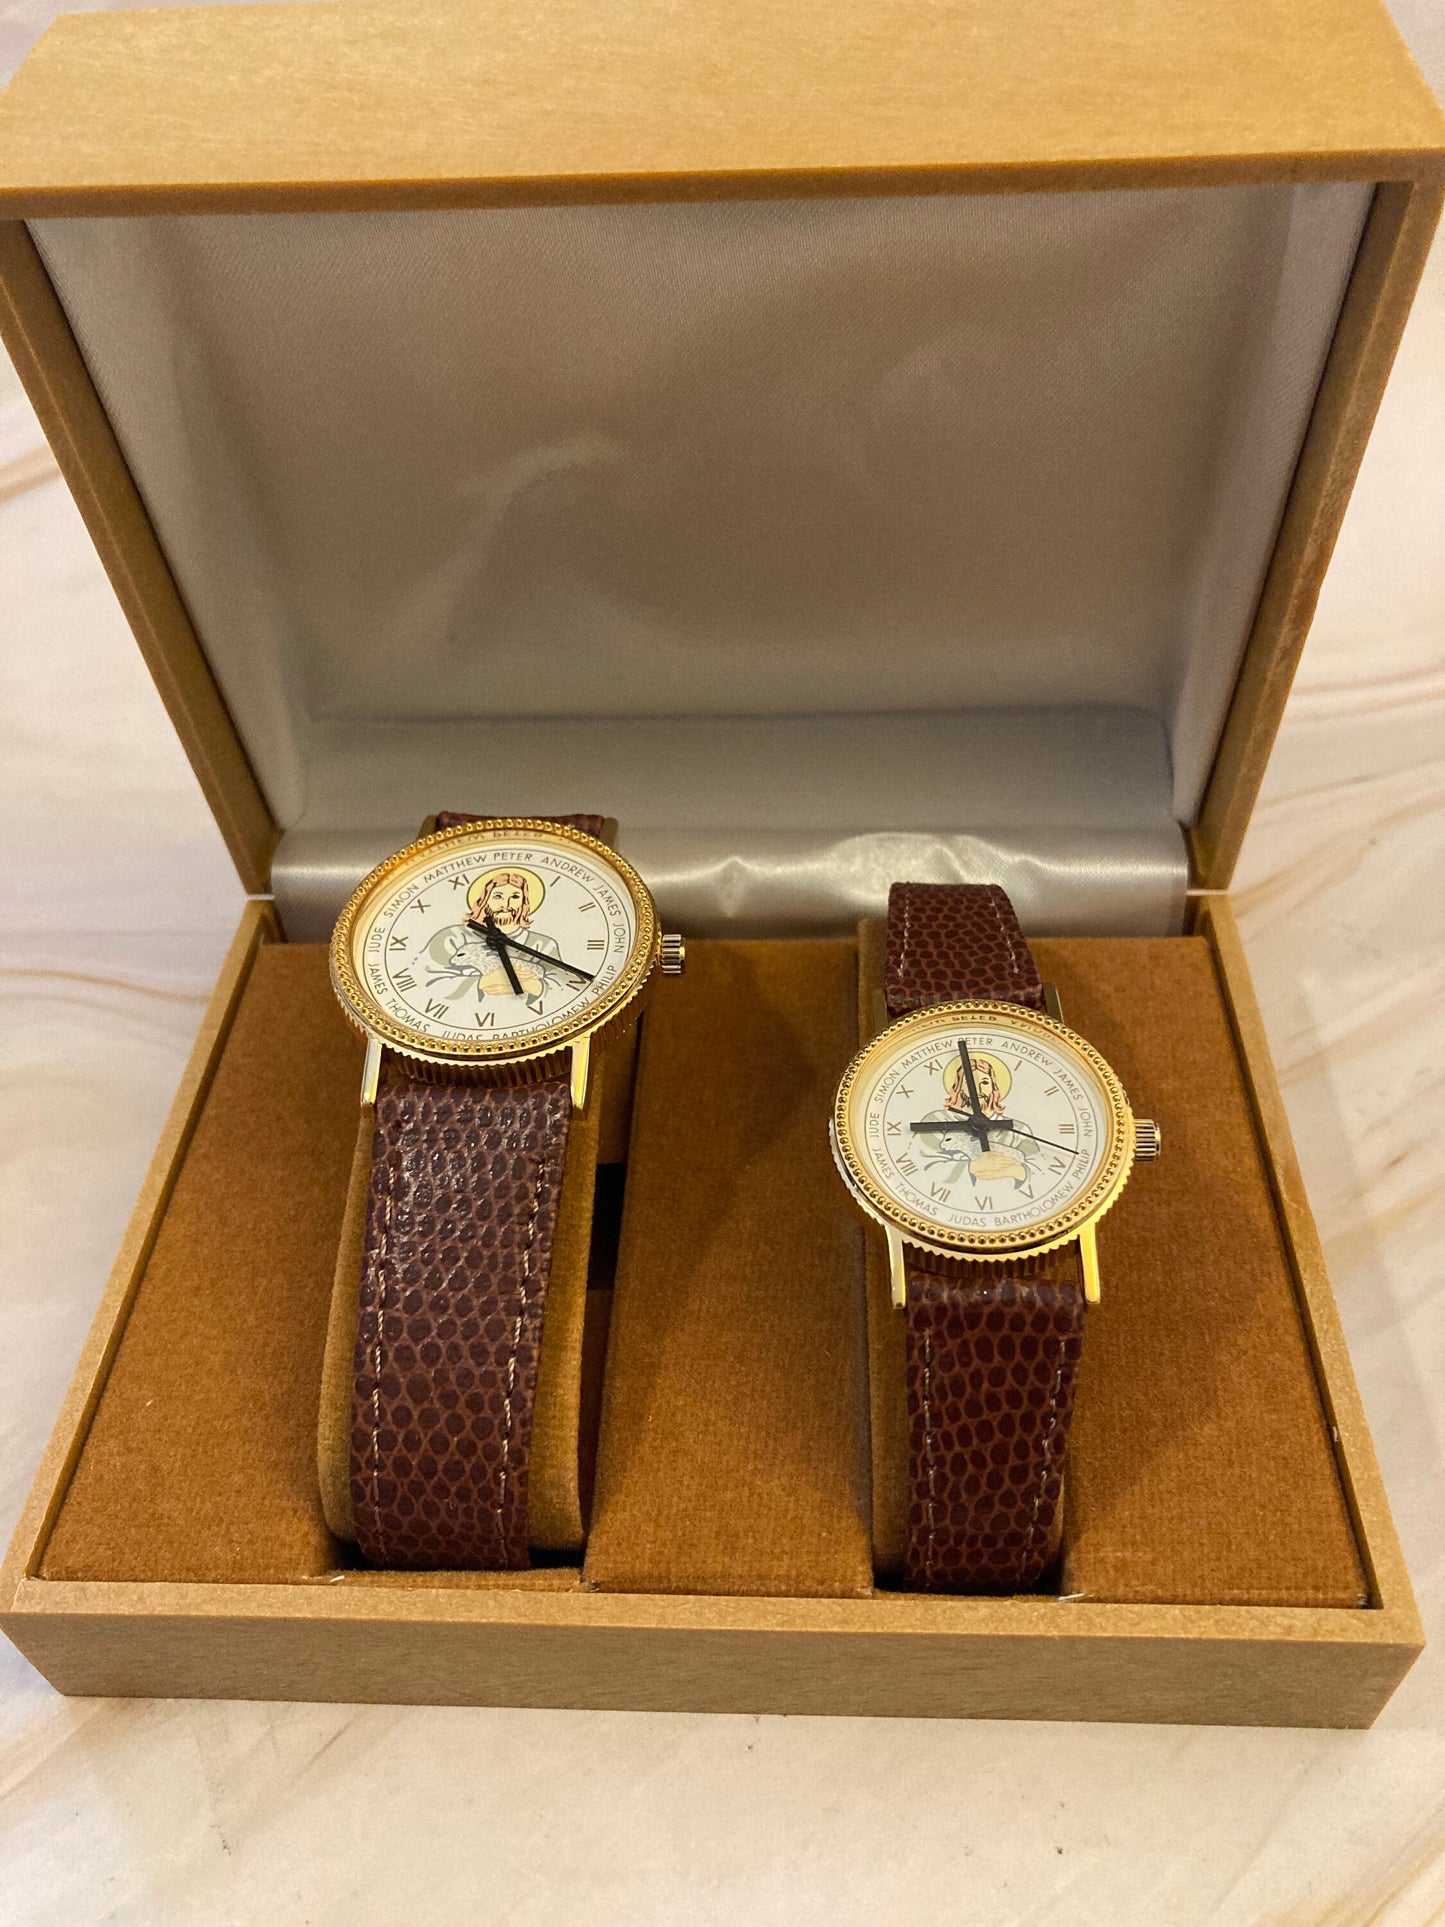 Pair of Jesus and The Twelve Apostles Leather Strapped Wrist Watches in Presentation Case - Religious Watch